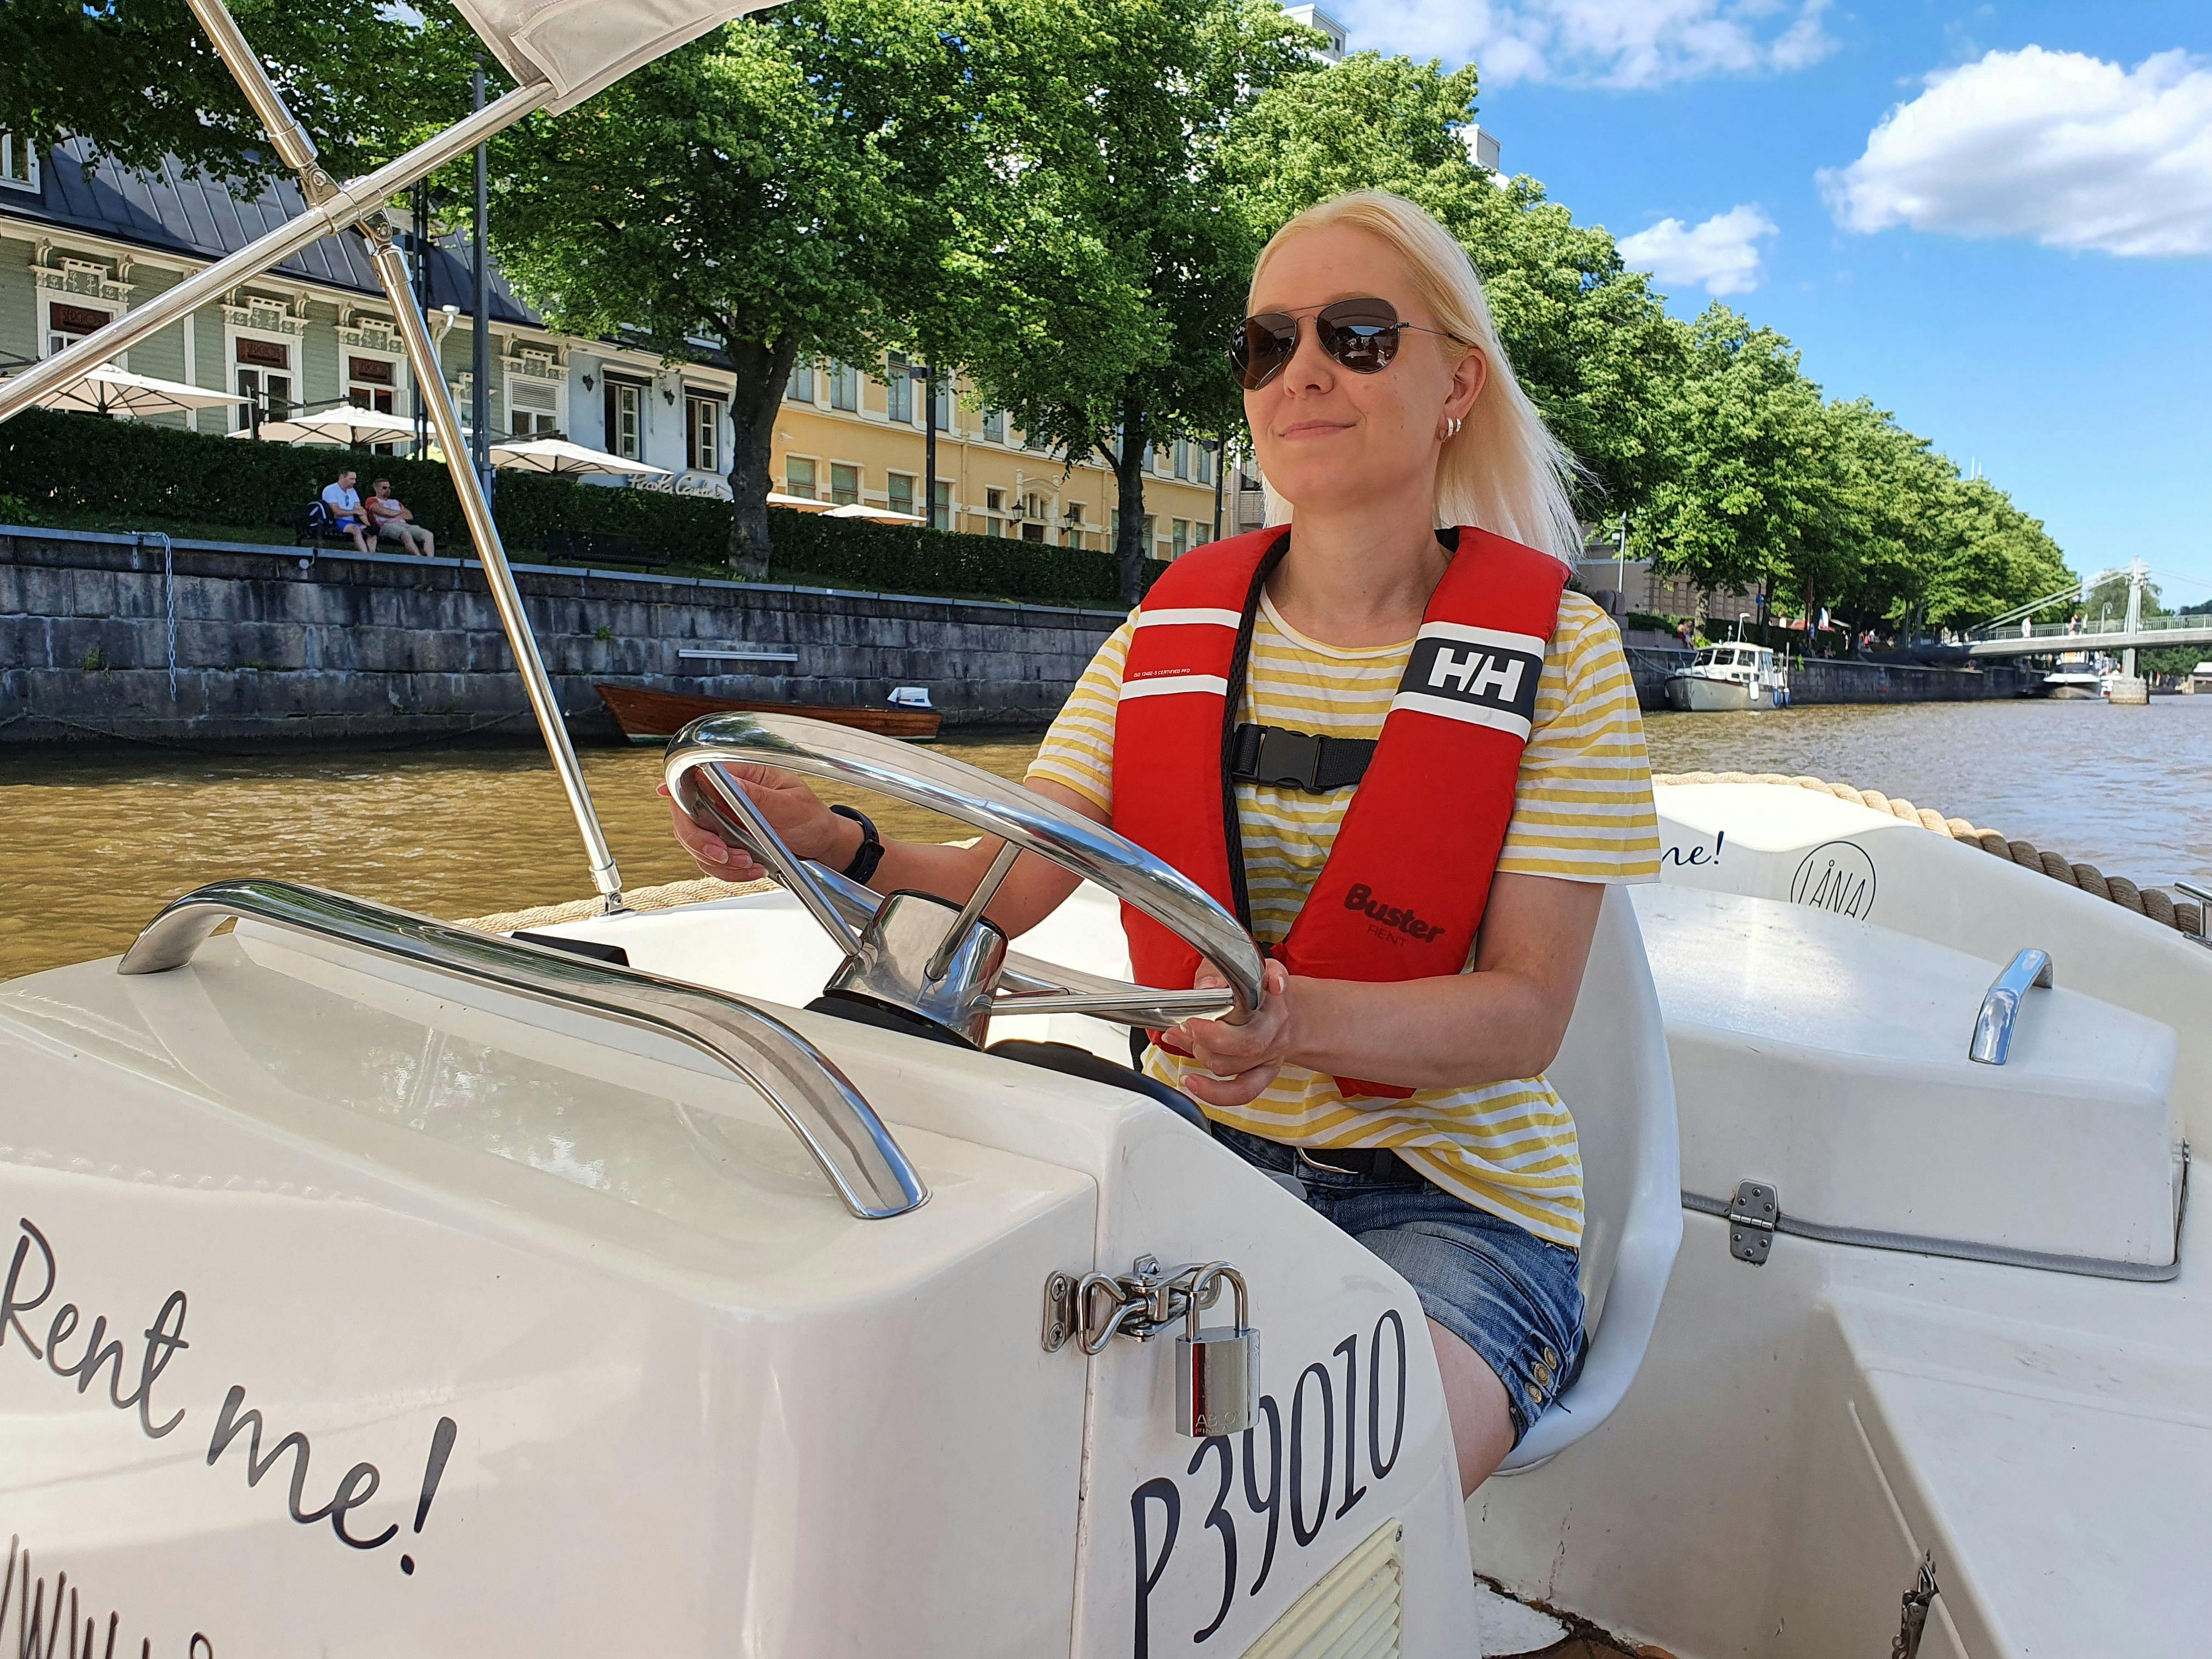 Experience Turku on a guided river cruise